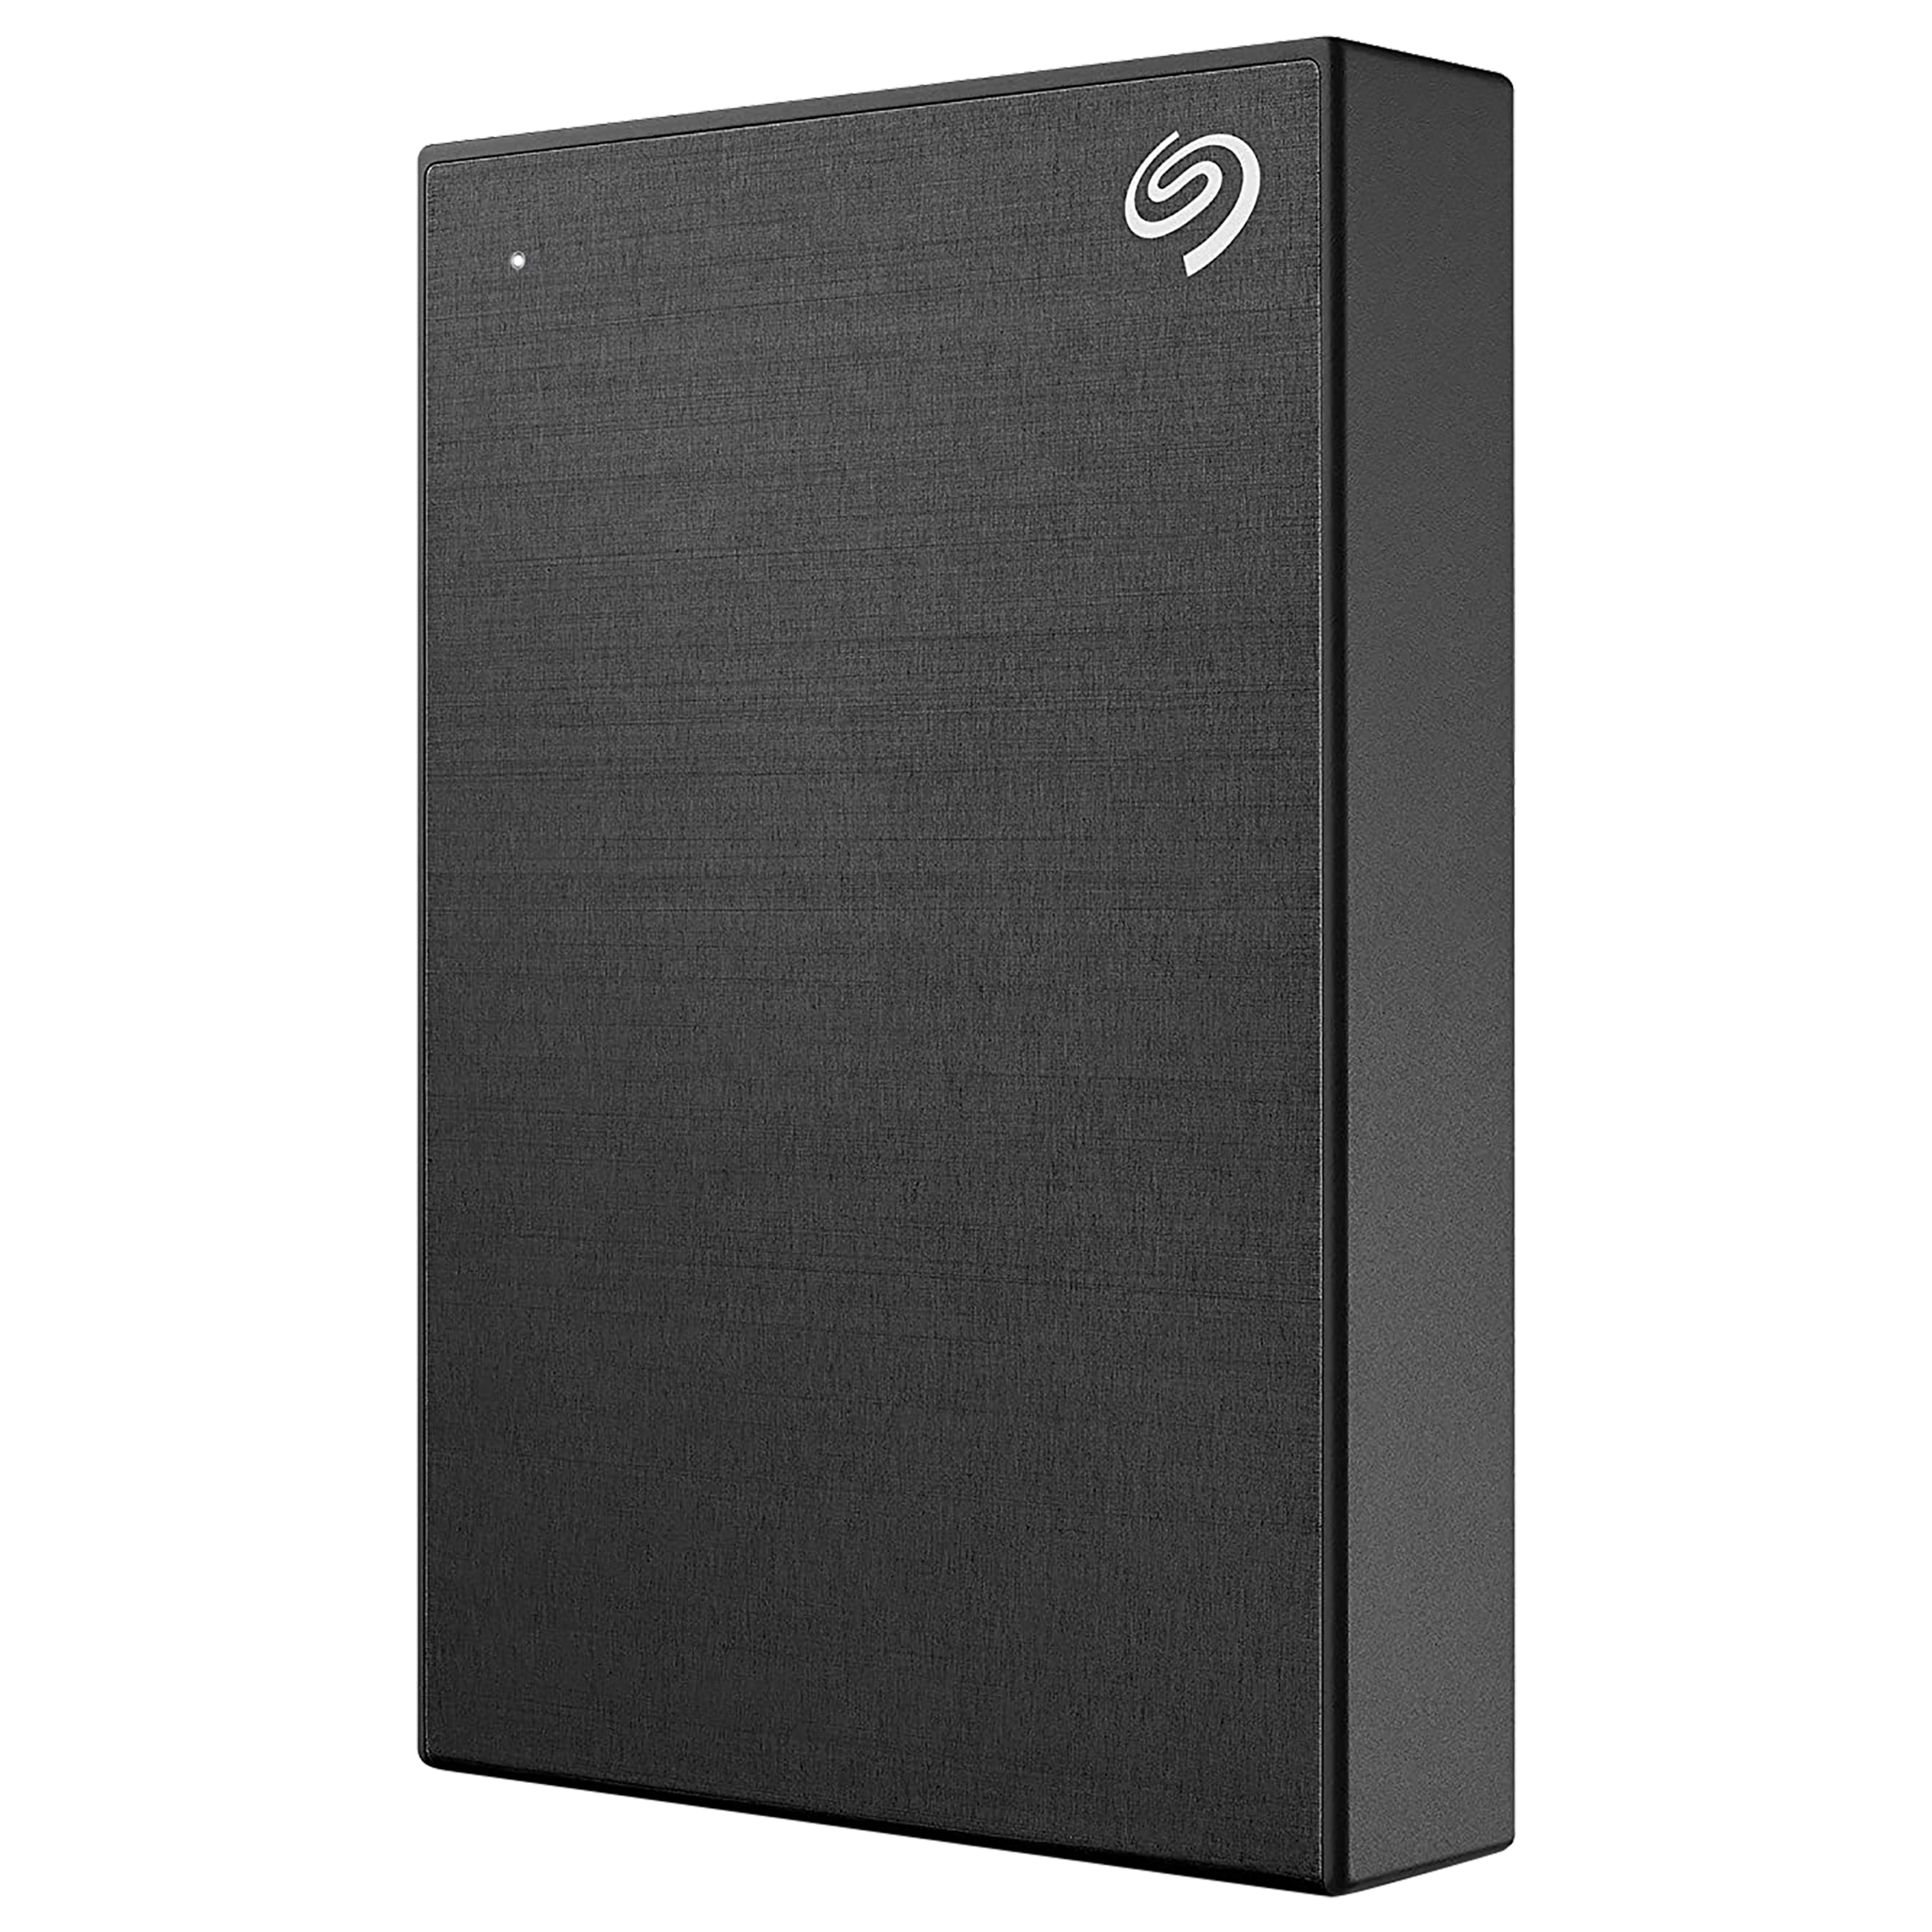 Seagate One Touch 5TB USB 3.0 Hard Disk Drive (Mac And Windows Compatible, STKZ5000400, Black)_1